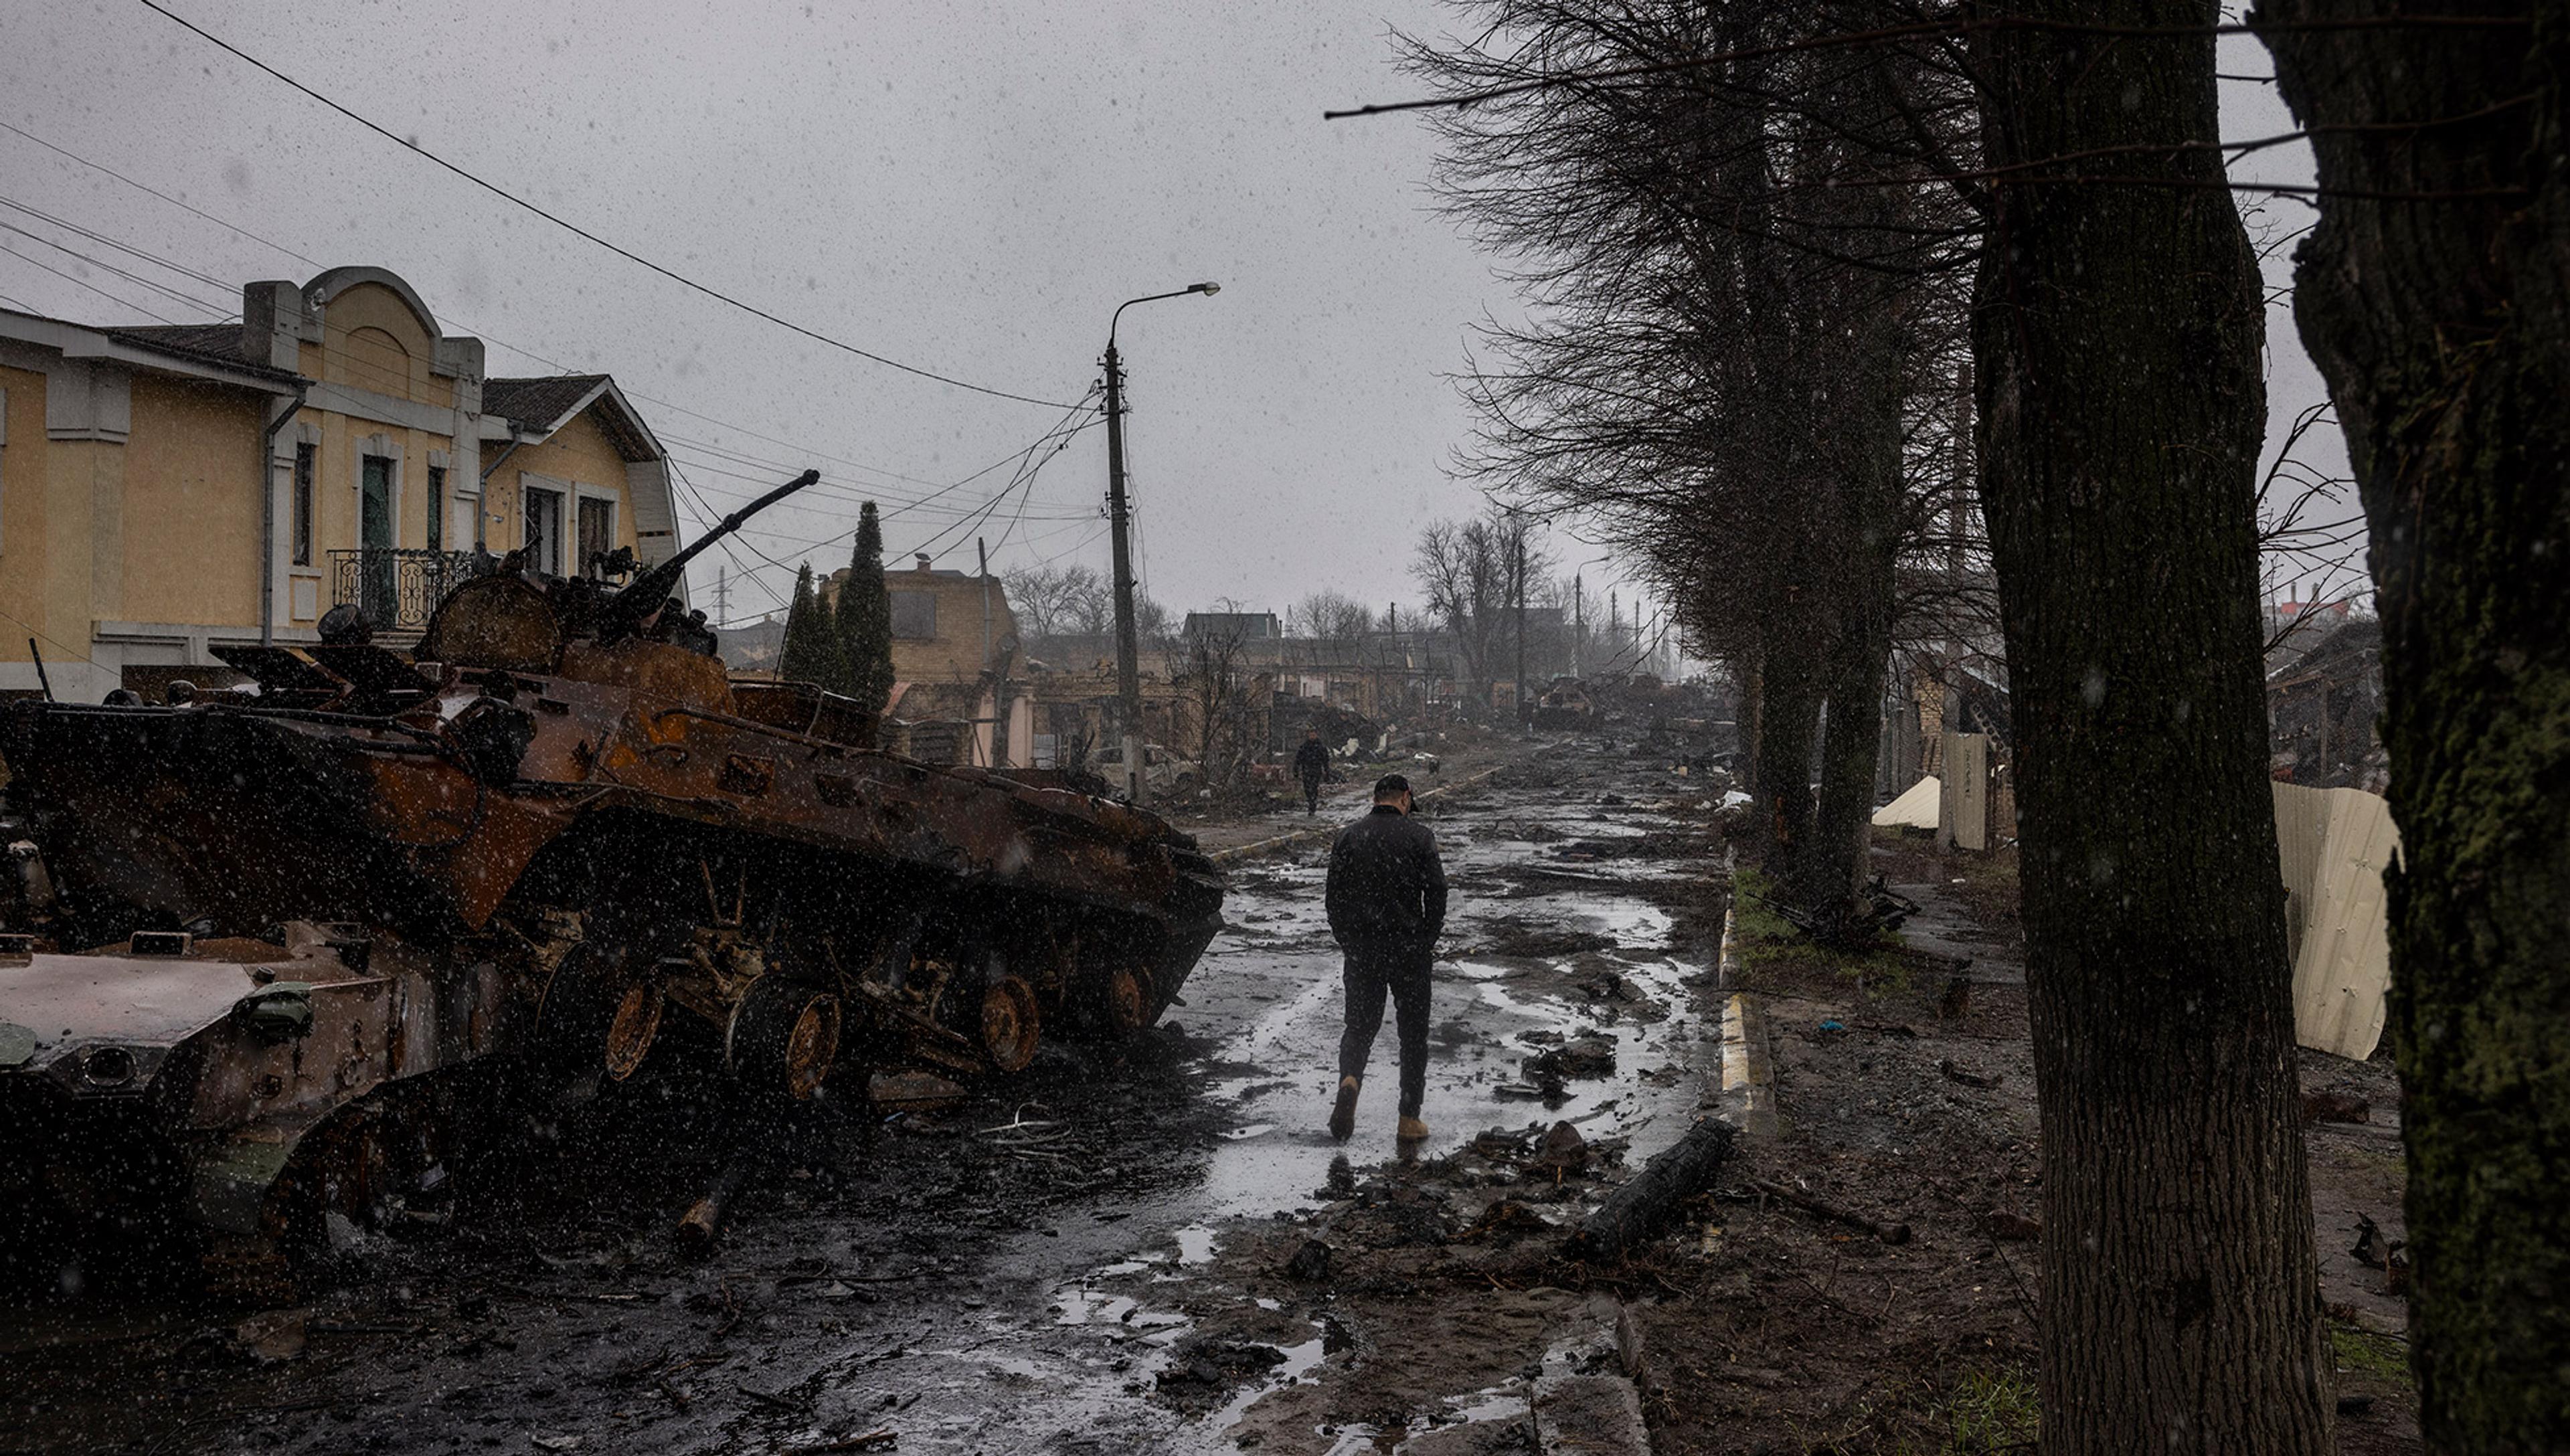 A man walks beneath overcast skies down a wet and rutted road past a burned out tank in war-ravaged Ukraine